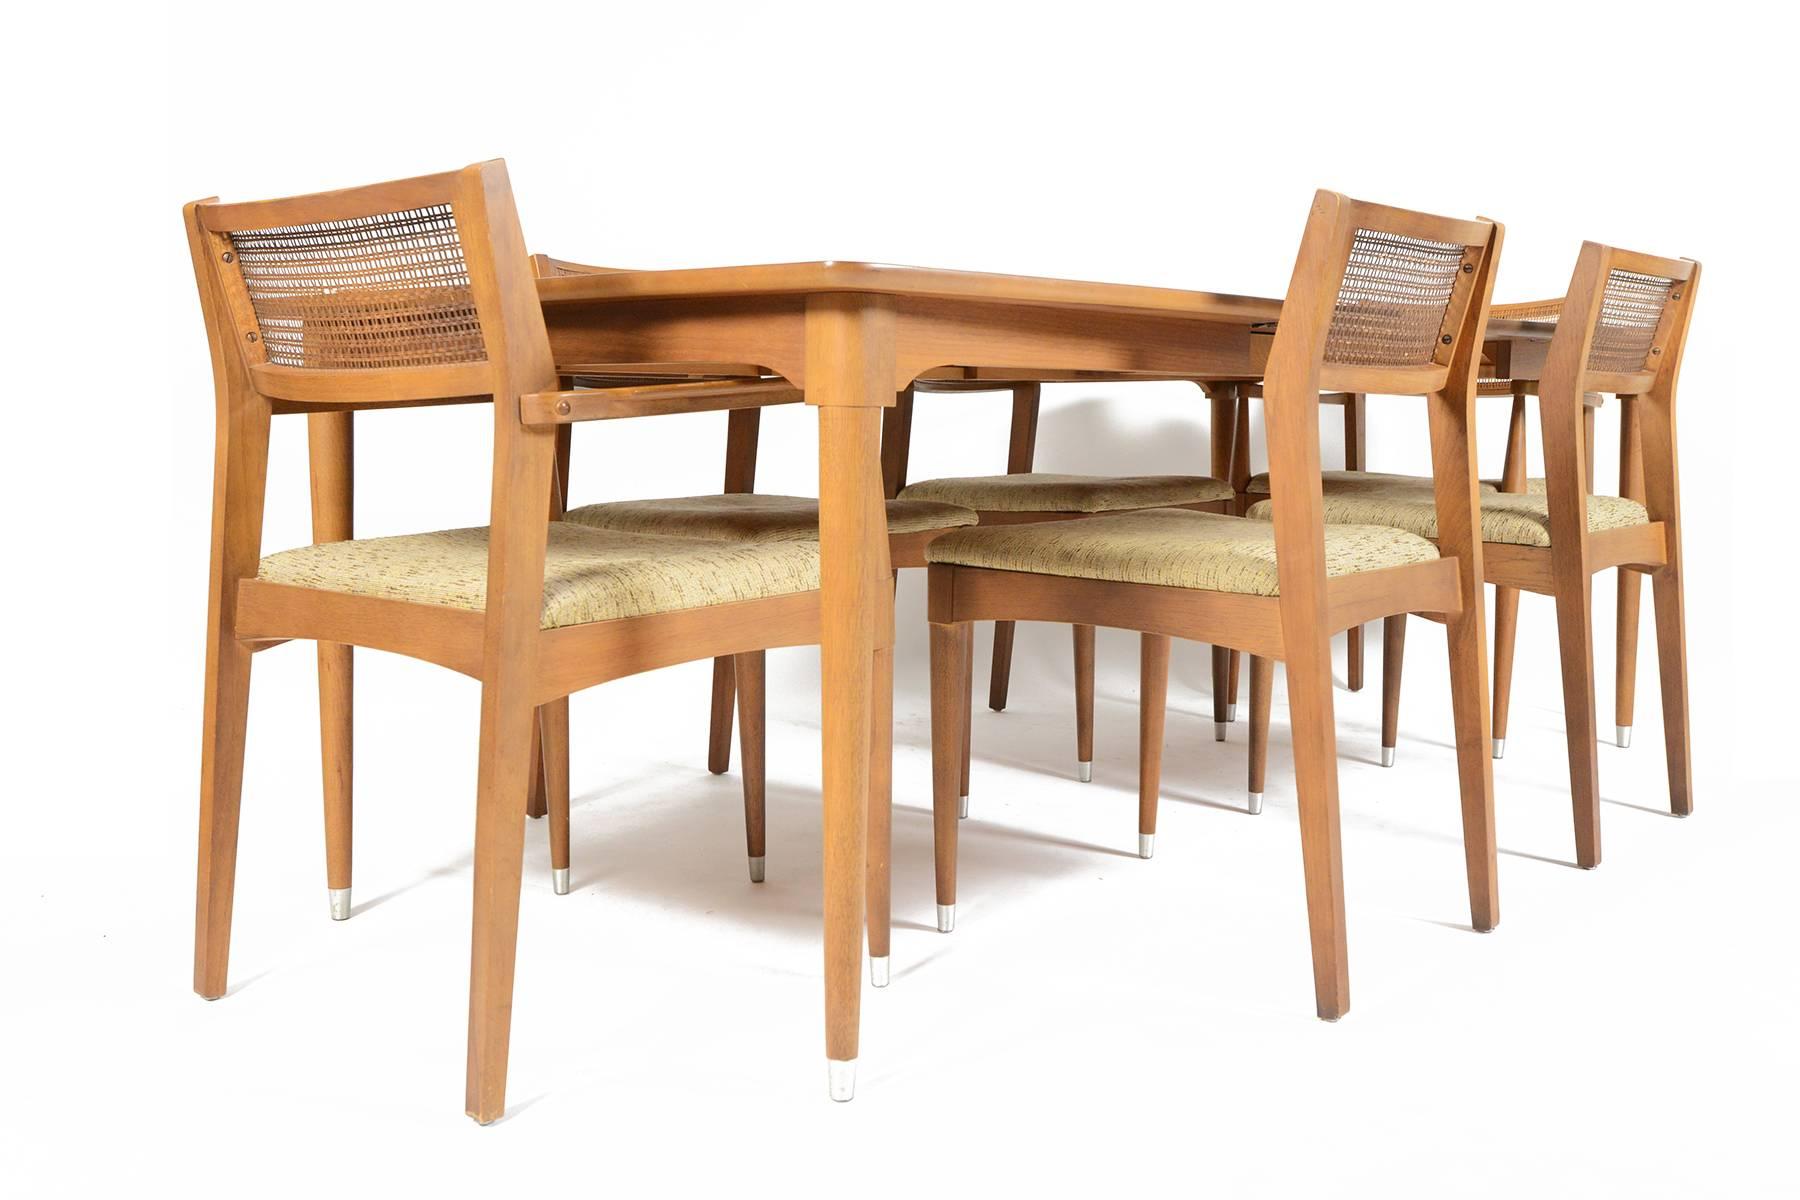 Wonderfully preserved, this stately B.P. John American Mid-Century Correlaire Collection dining set in walnut is a fantastic set for any dining room. The set of six chairs includes two captains chairs. Original cane backrests create an airy, open